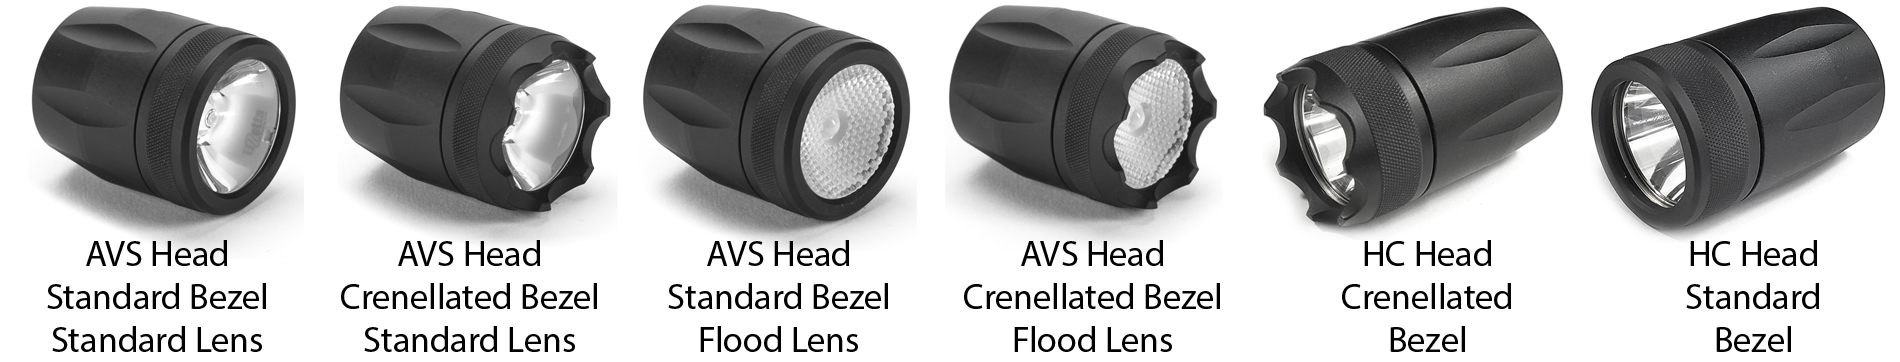 Pic of AVS heads with both bezels with standard lenses and flood lenses next to HC heads with both bezels